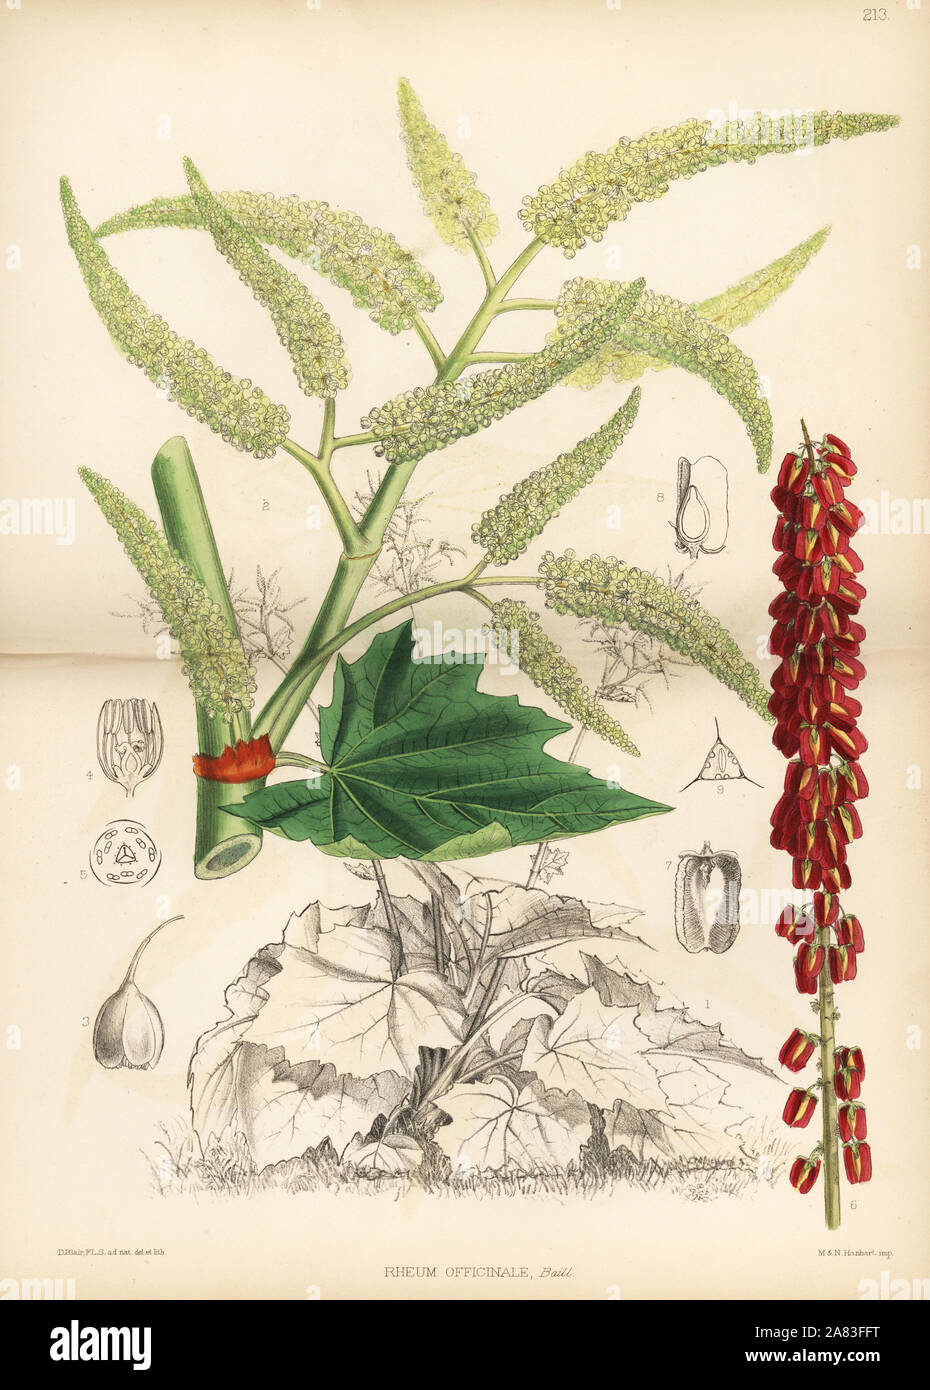 Tibetan rhubarb, Rheum officinale. Handcoloured lithograph by Hanhart after a botanical illustration by David Blair from Robert Bentley and Henry Trimen's Medicinal Plants, London, 1880. Stock Photo